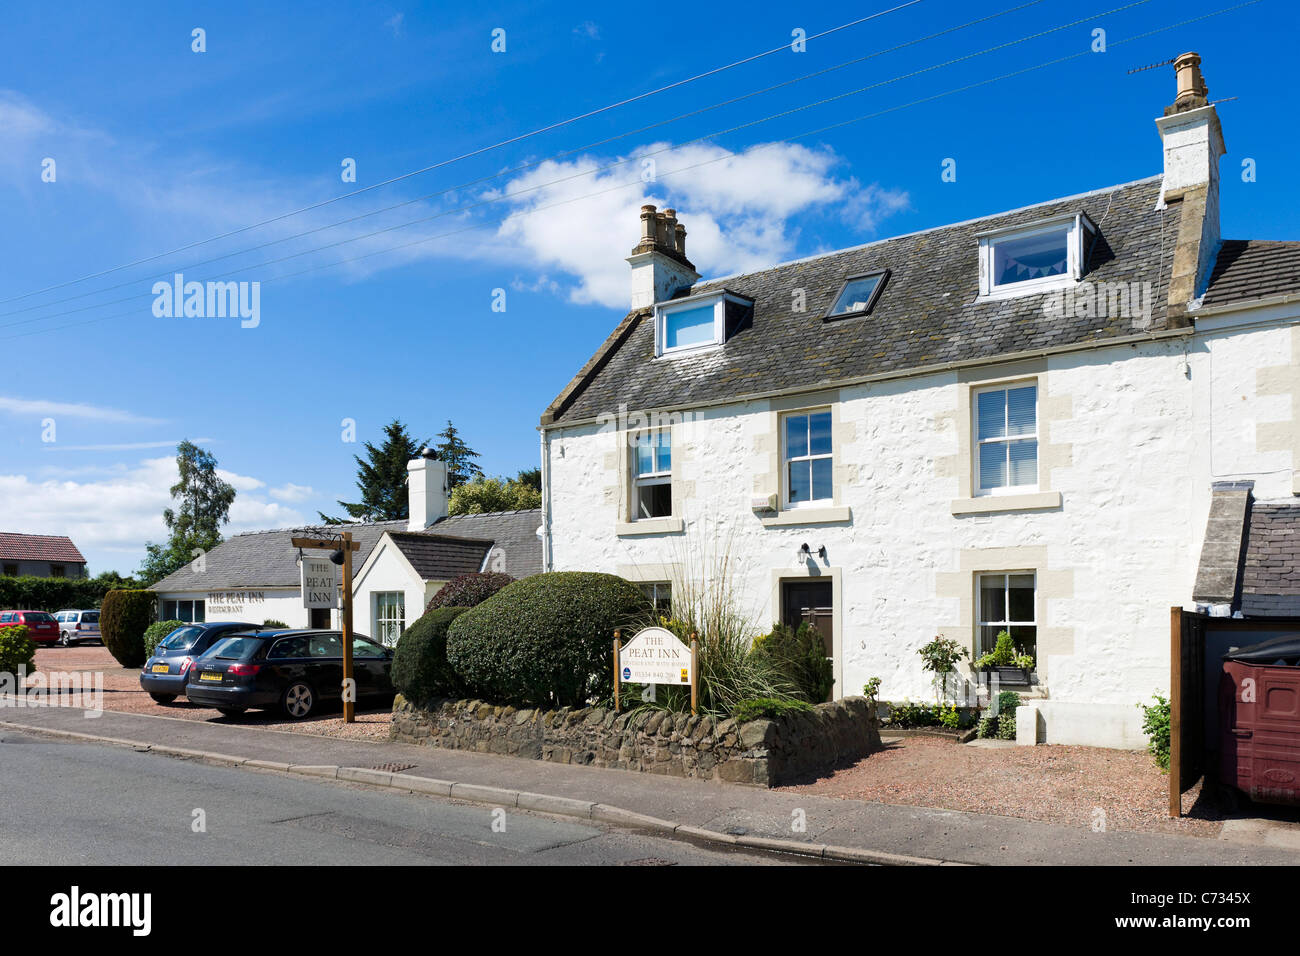 The well known Peat Inn hotel and restaurant near St Andrews, Fife, Central Scotland, UK Stock Photo